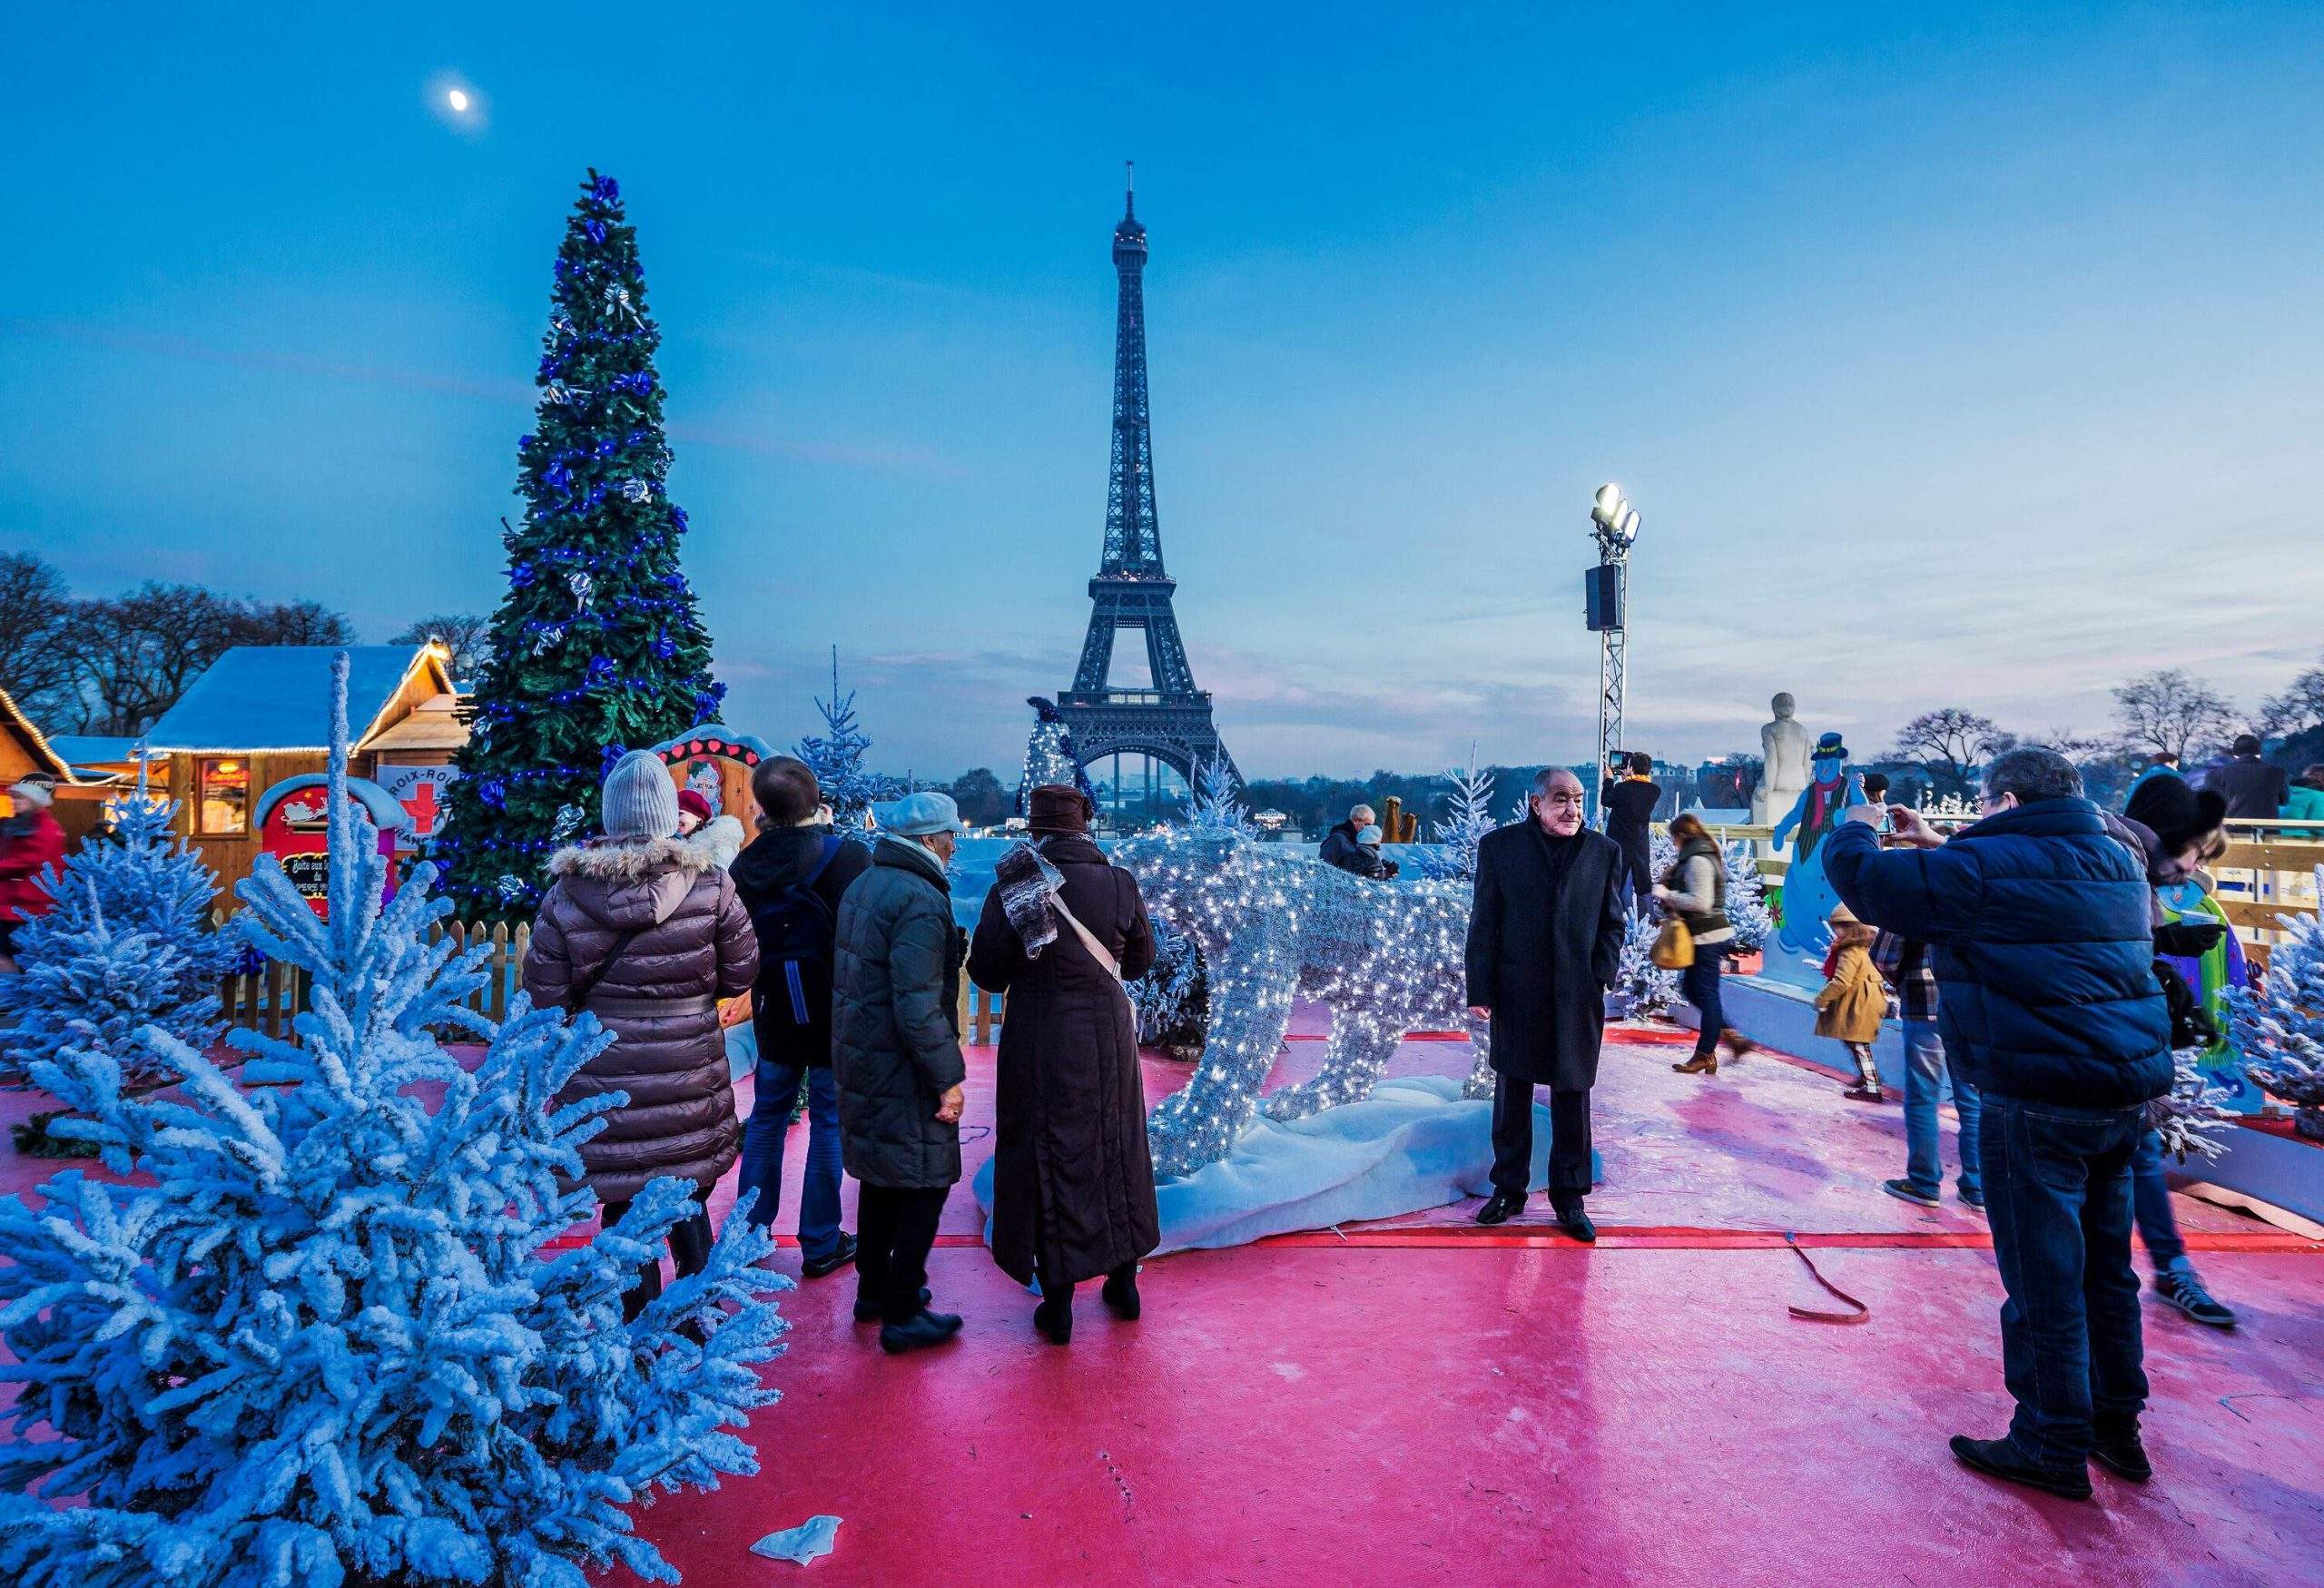 Paris at Christmas time with the Eiffel Tower in the background